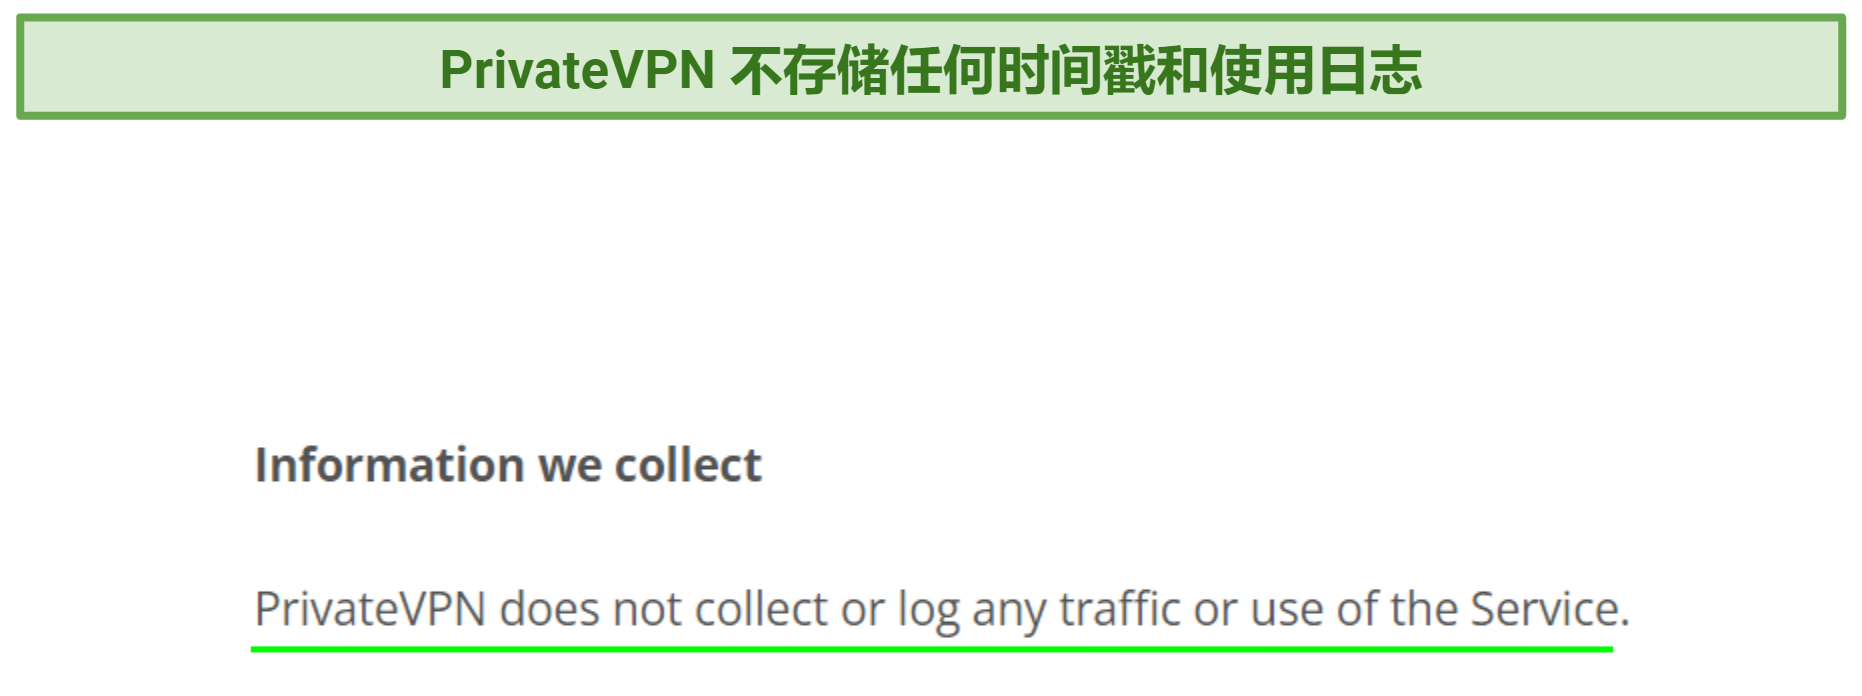 Screenshot of PrivateVPN's privacy policy highlighting the information it collects